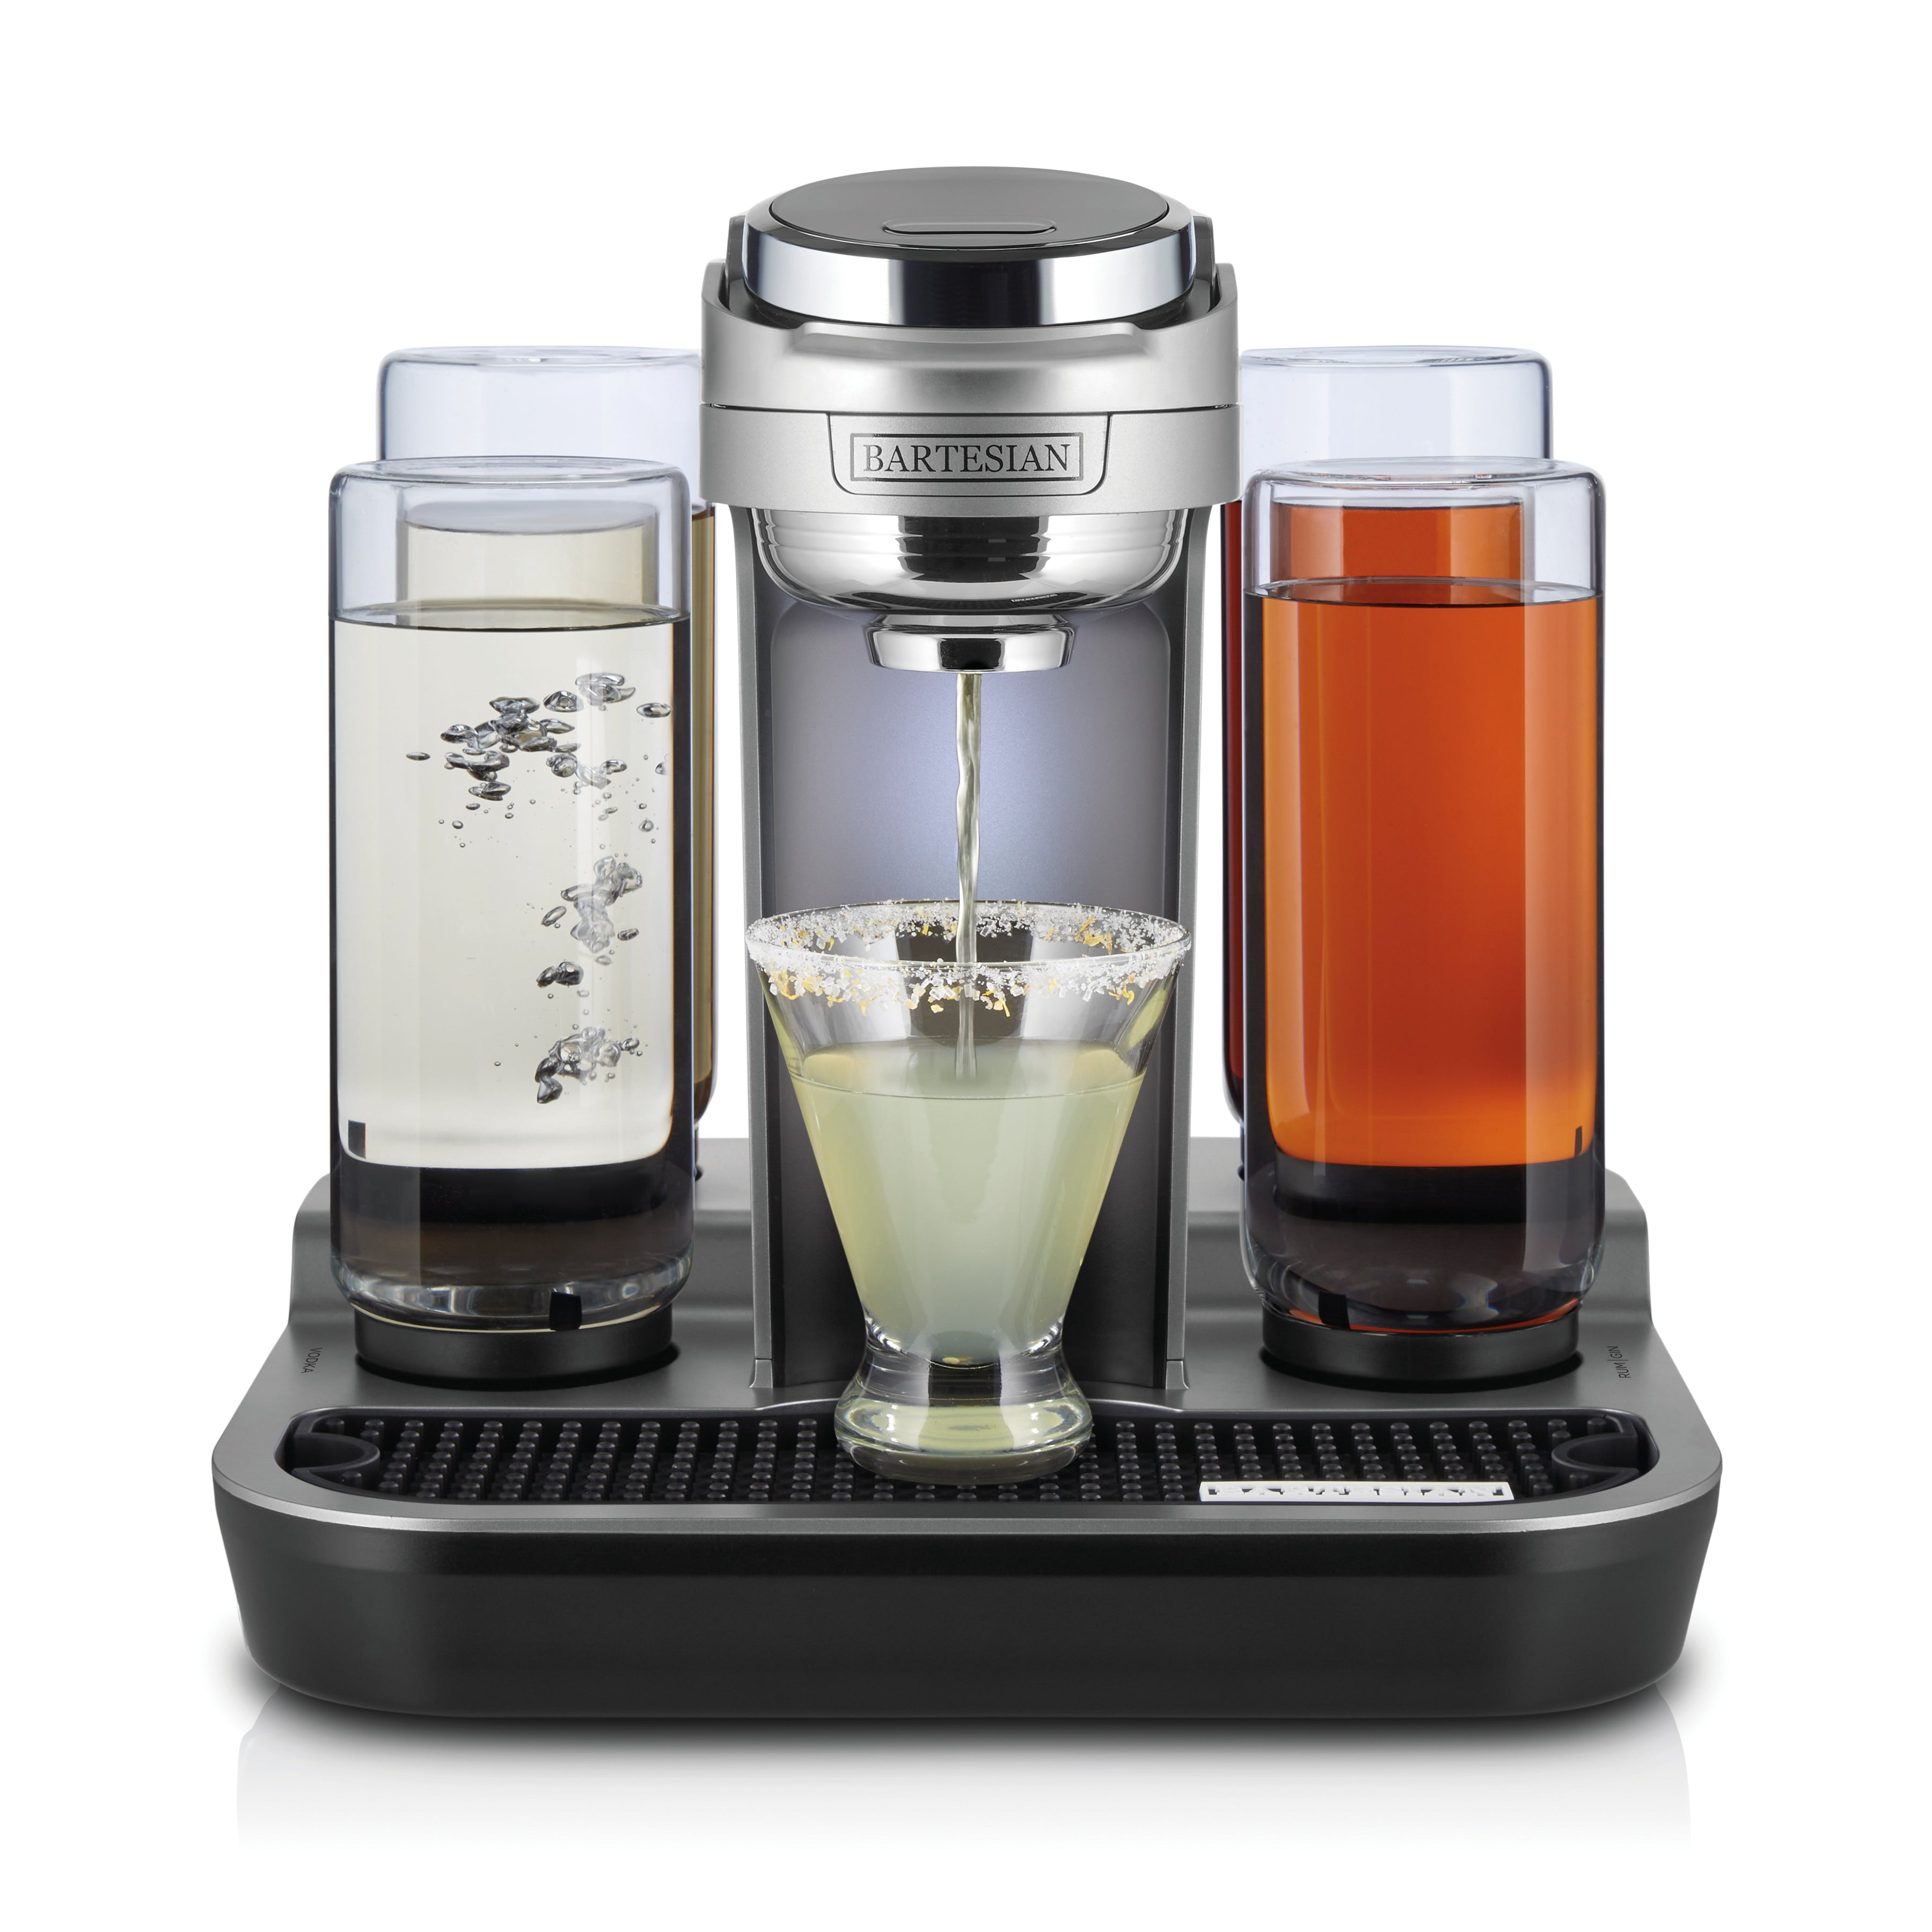 Keurig machine for cocktails available in Florida